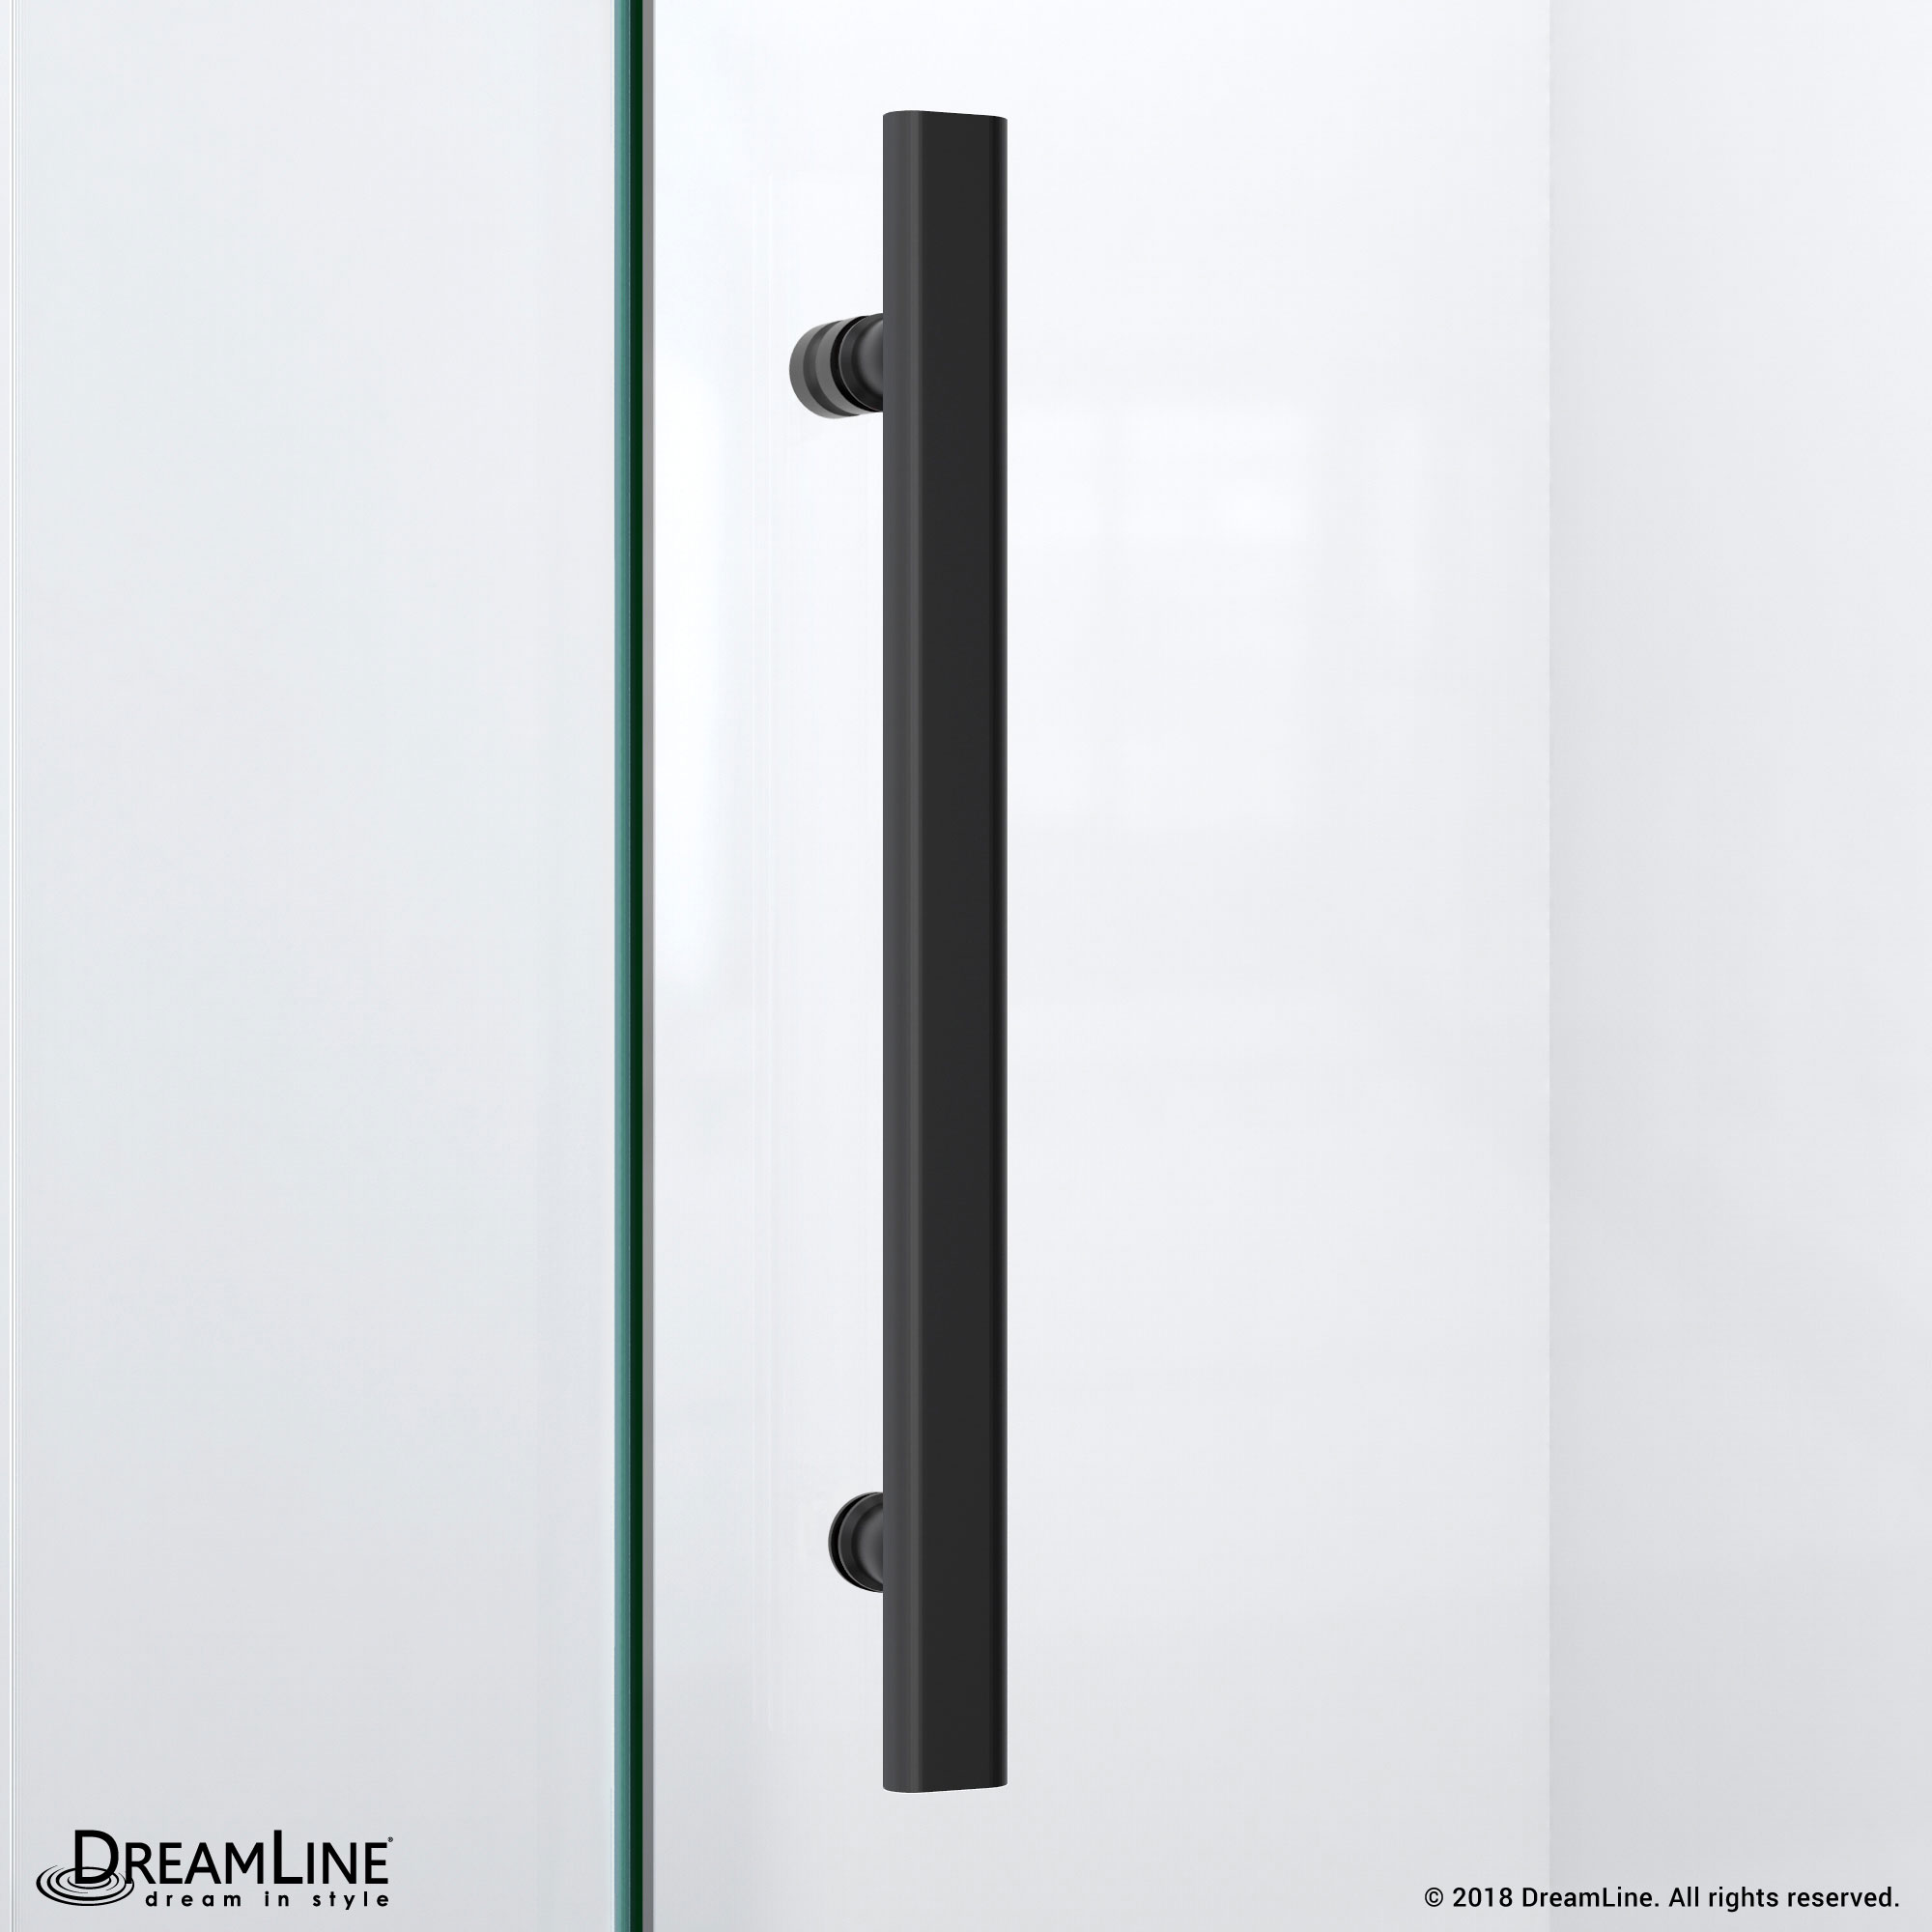 DreamLine Prism Lux 38 in. D x 38 in. W x 74 3/4 in. H Hinged Shower Enclosure in Satin Black with Corner Drain White Base Kit